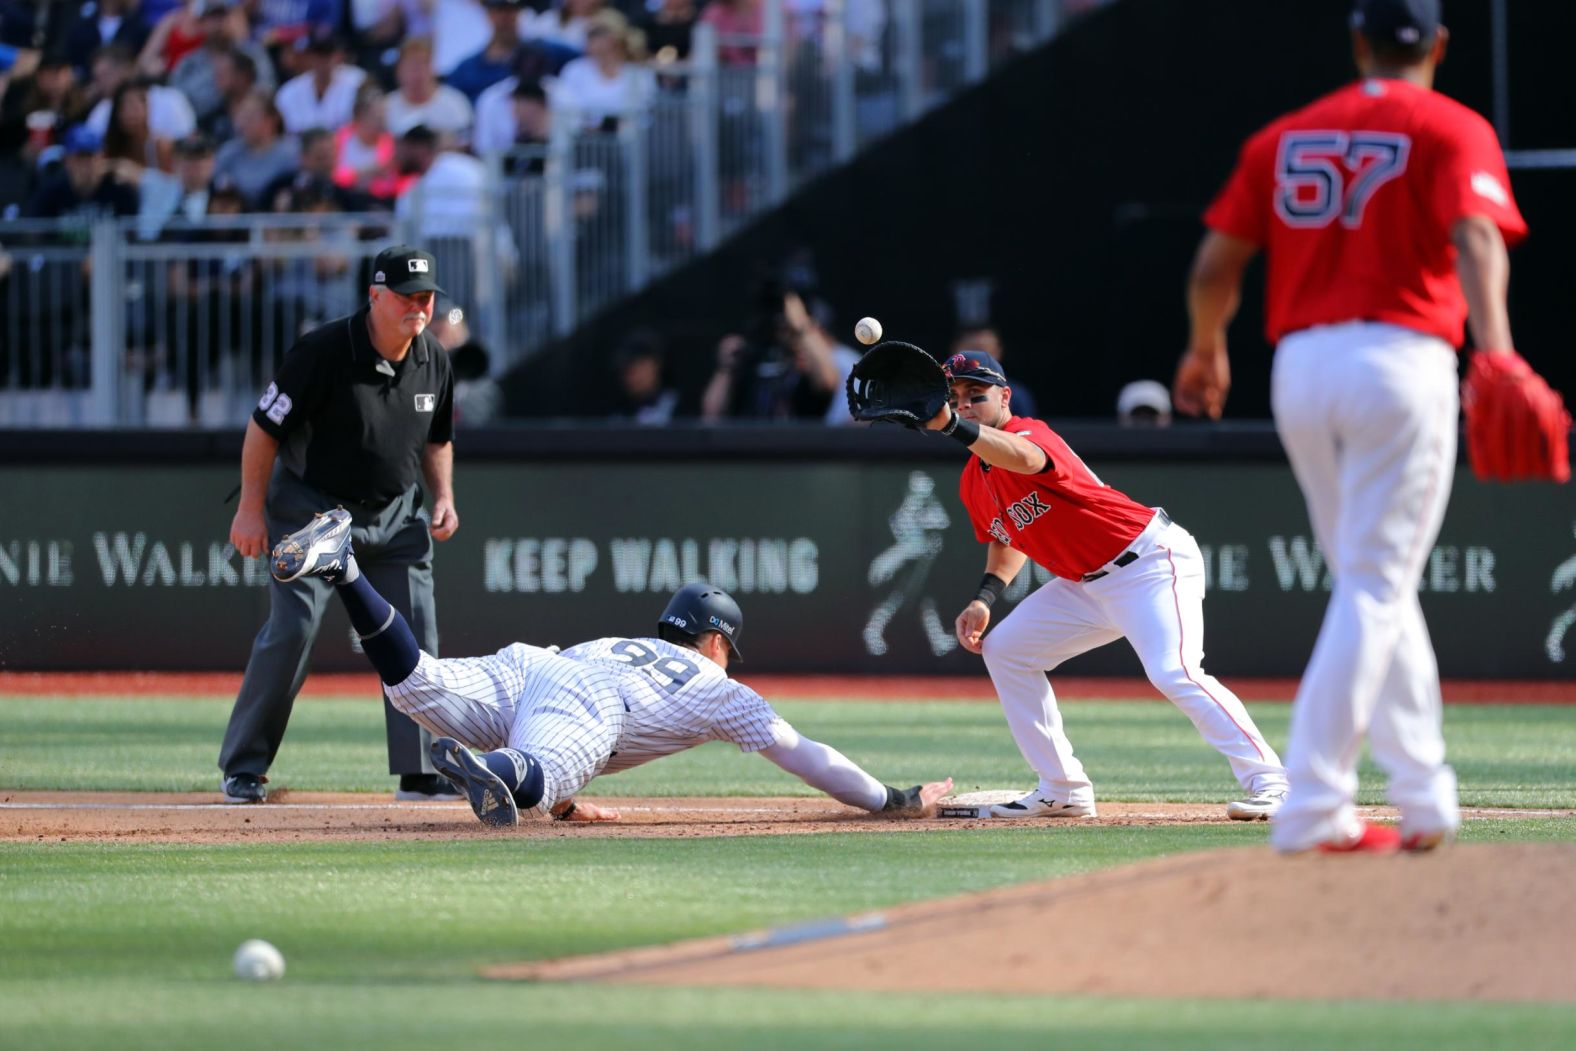 New York Yankees right fielder Aaron Judge dives back to first during the game on June 30.